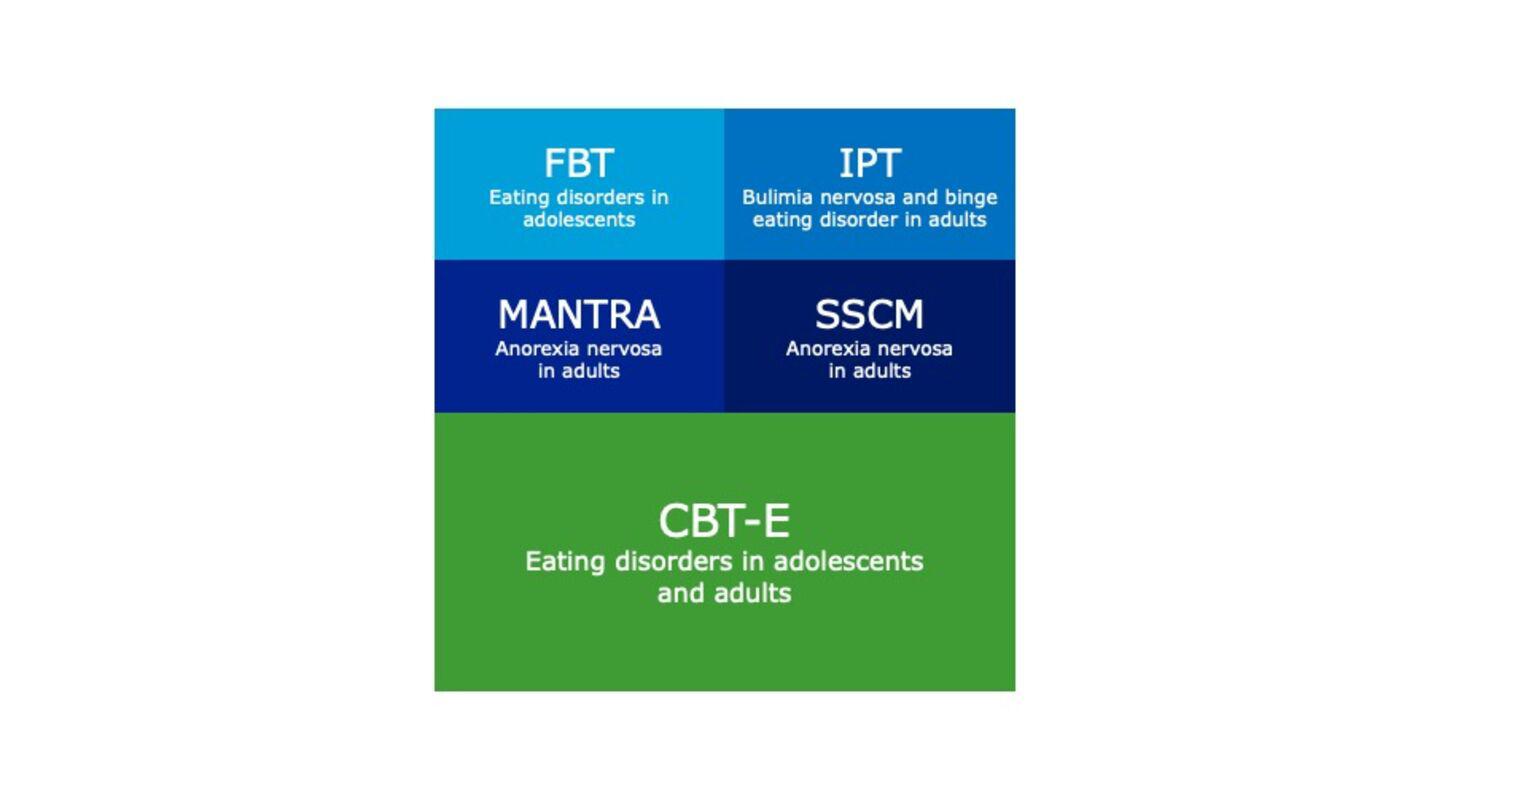 Treatment of eating disorders in adults and adolescents